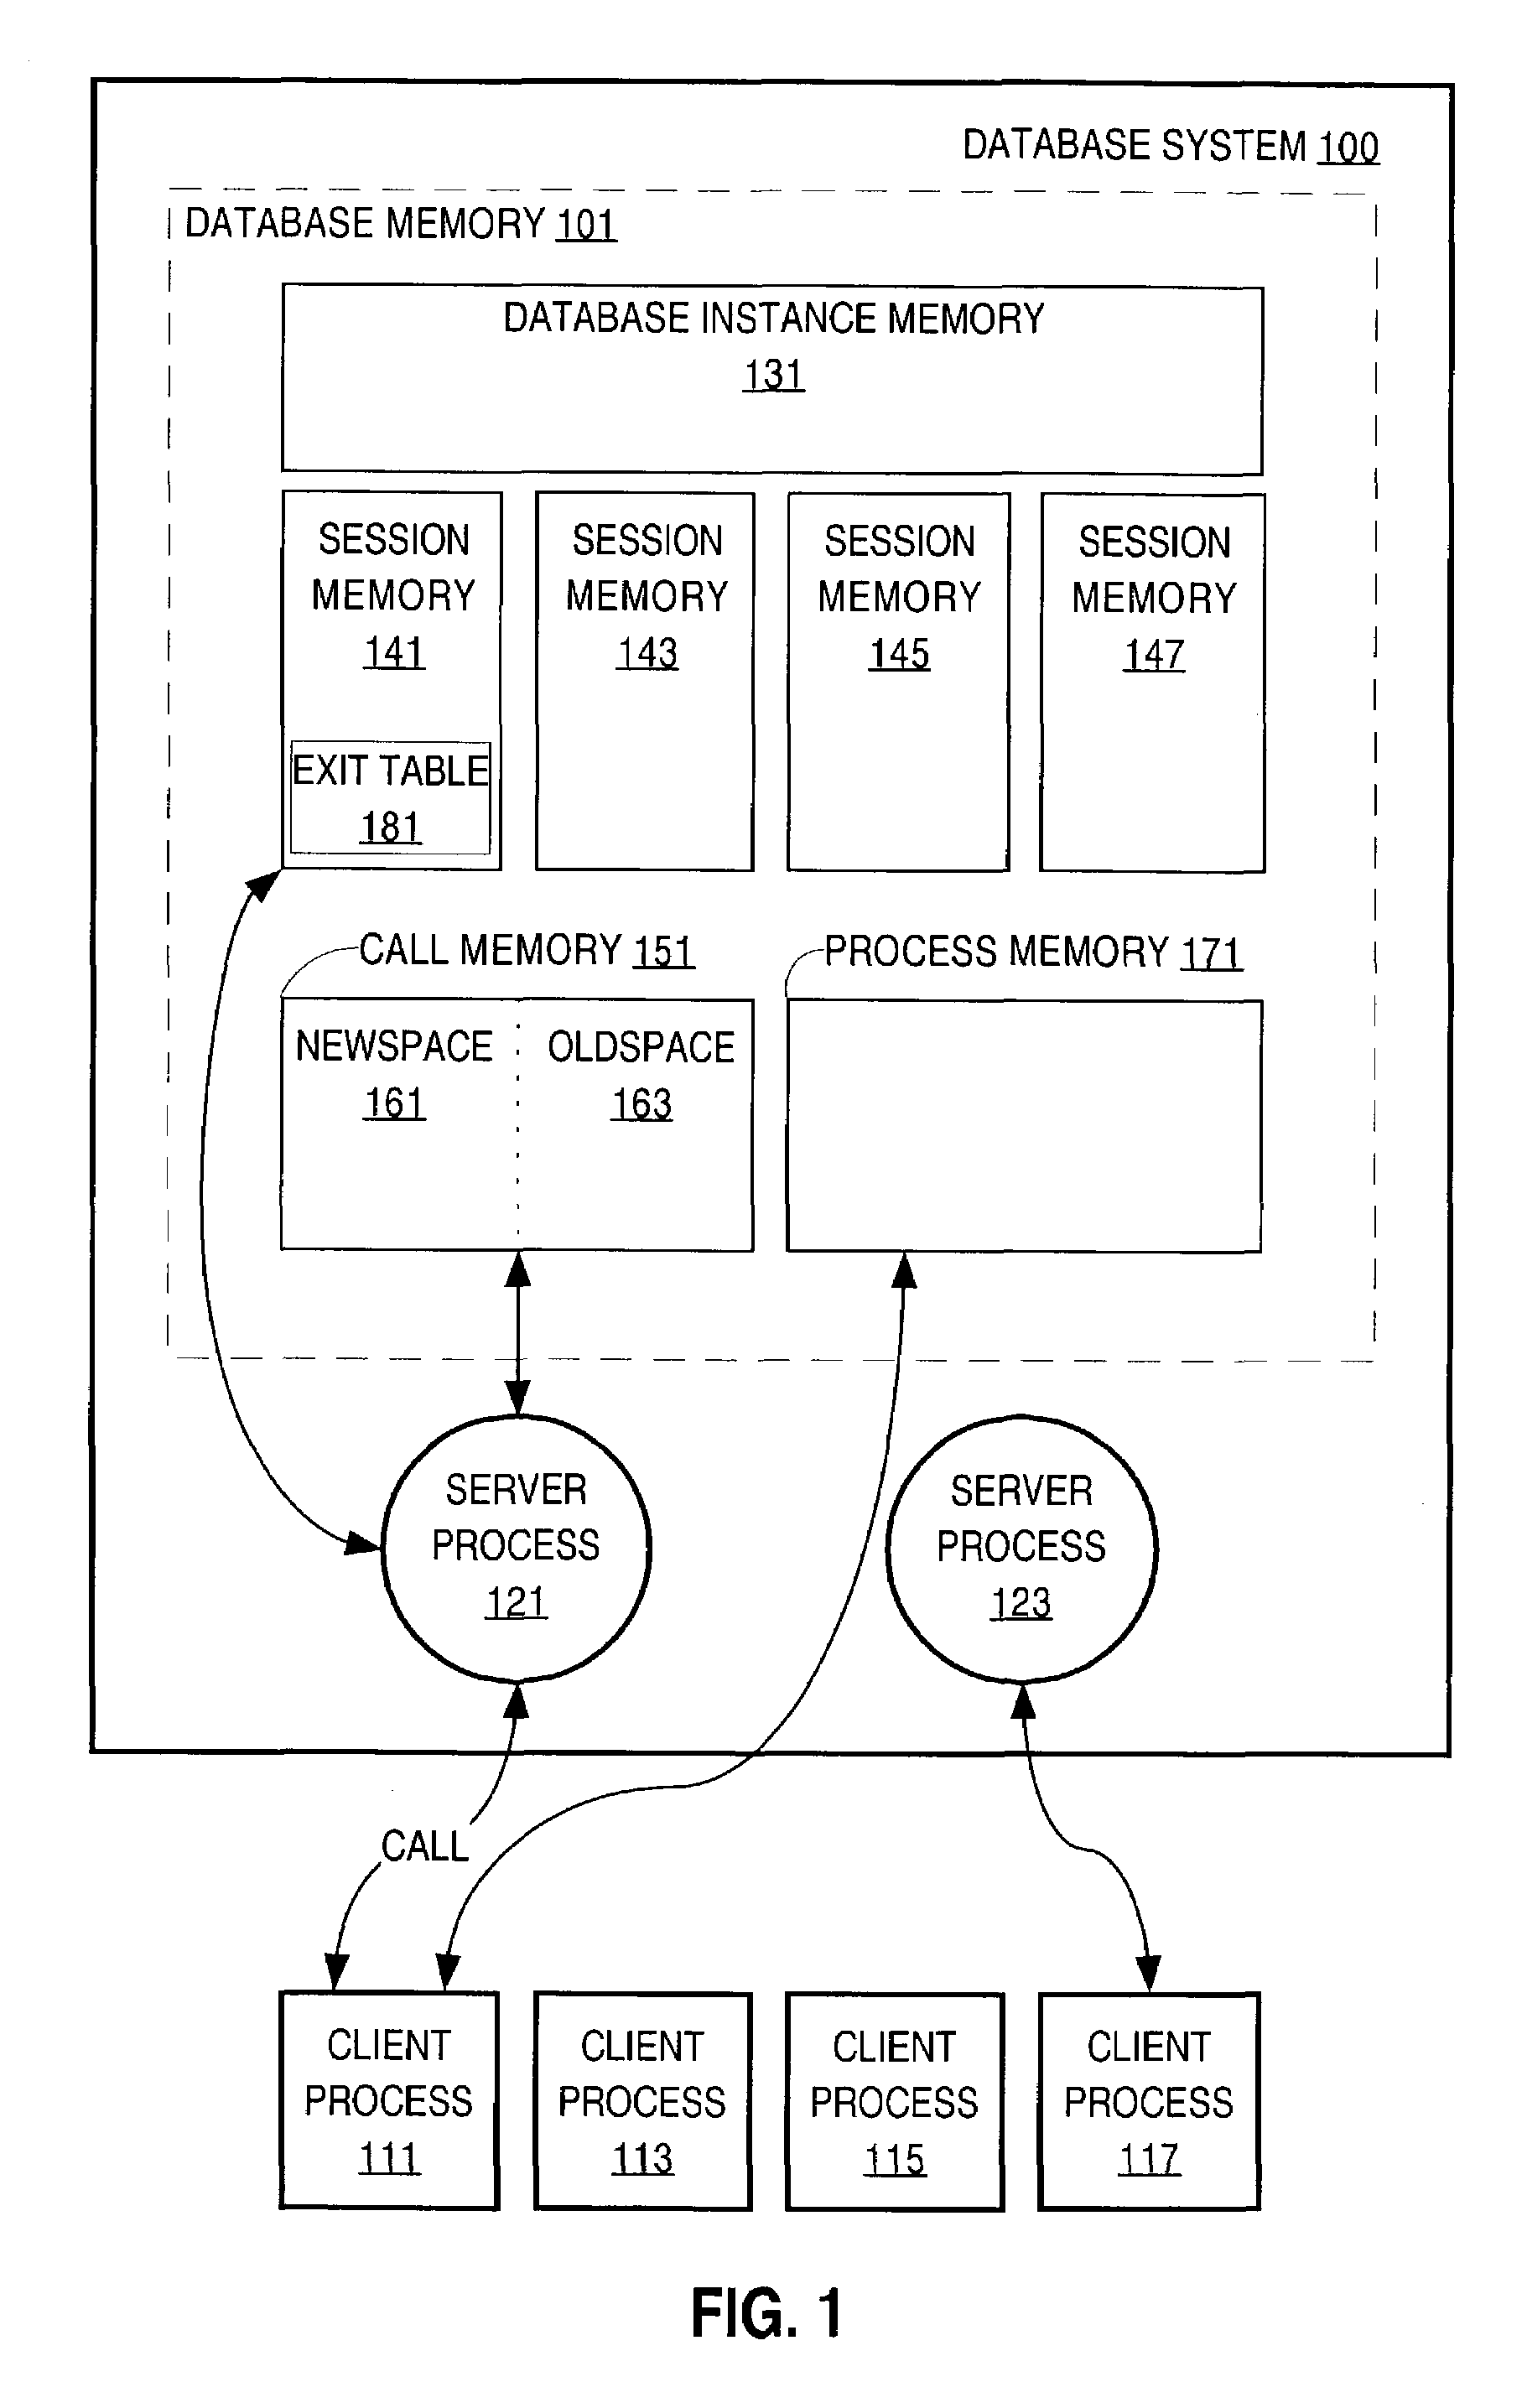 Method for performing data migration